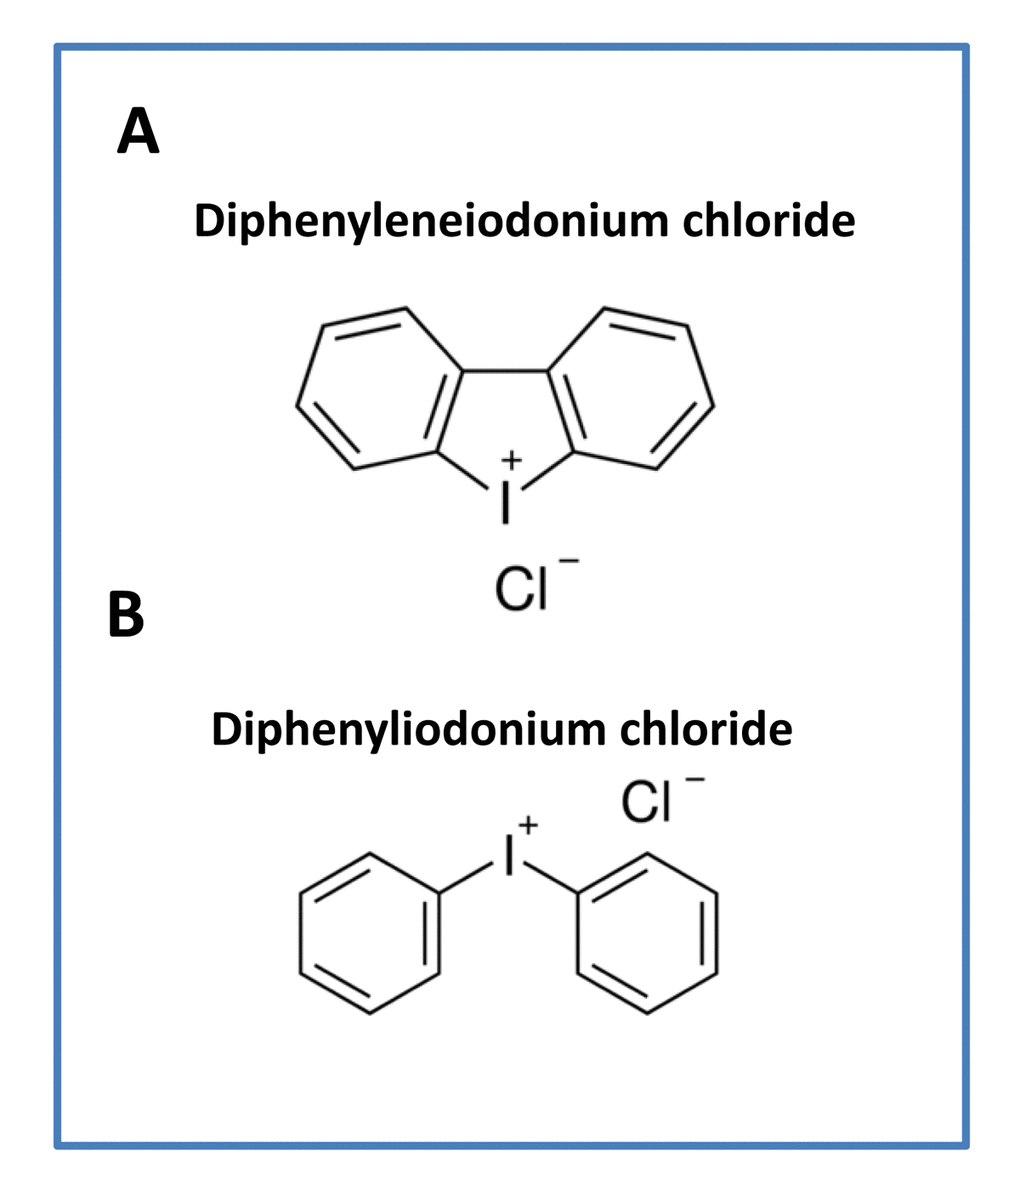 Comparison of the structures of (A) Diphenyleneiodonium (DPI), with the related compound (B) Diphenyliodonium chloride. Note the key similarities between these two chemical structures. Both of these classes of molecules target flavin-containing proteins.